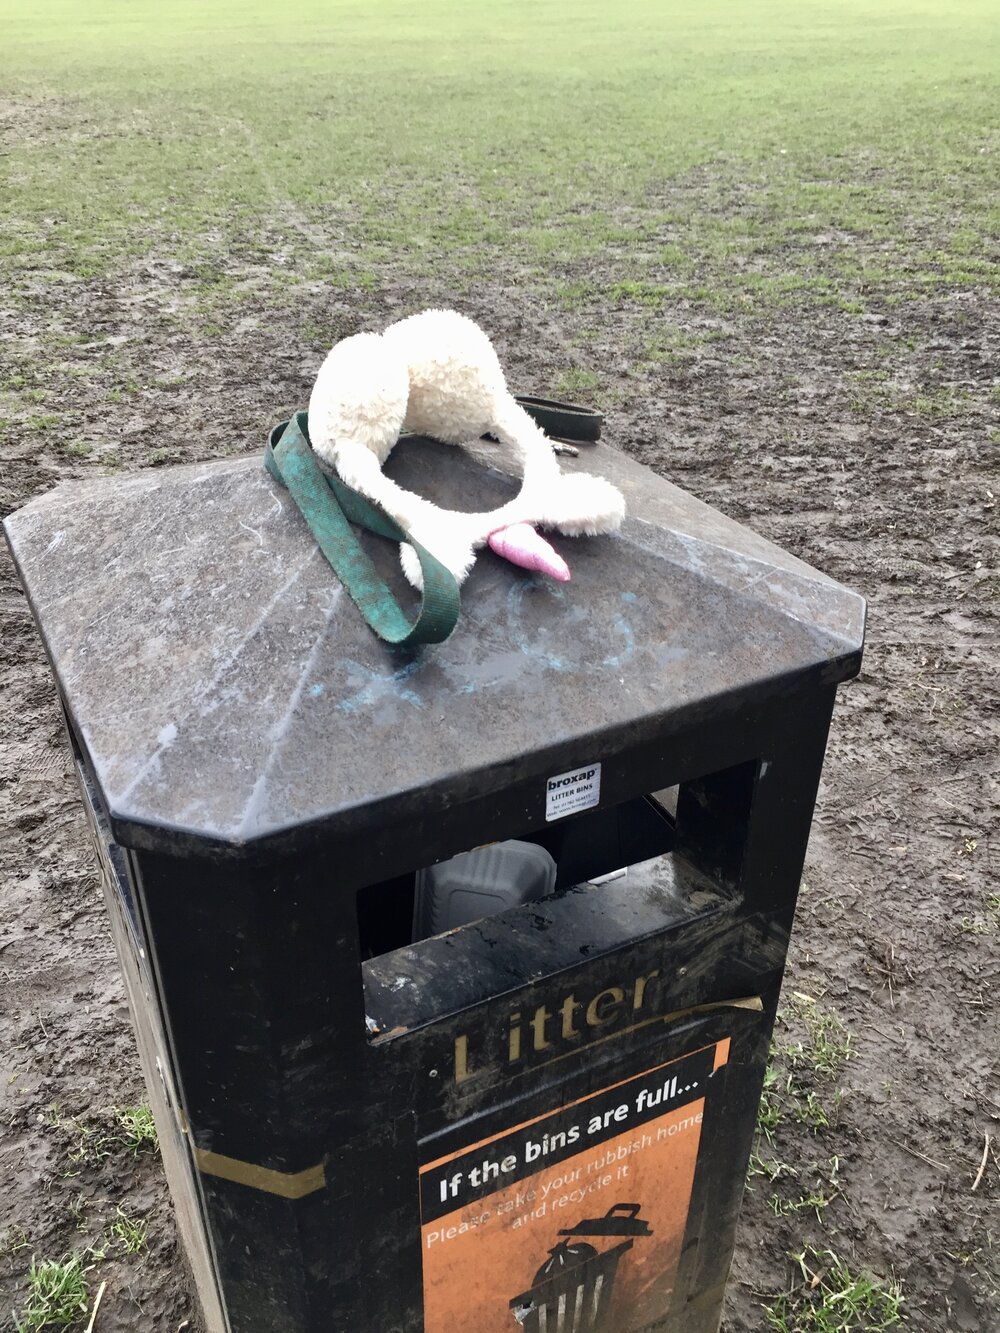  A pair of fluffy, cream unicorn ear muffs on top of a bin, next to a muddy green dog lead.  